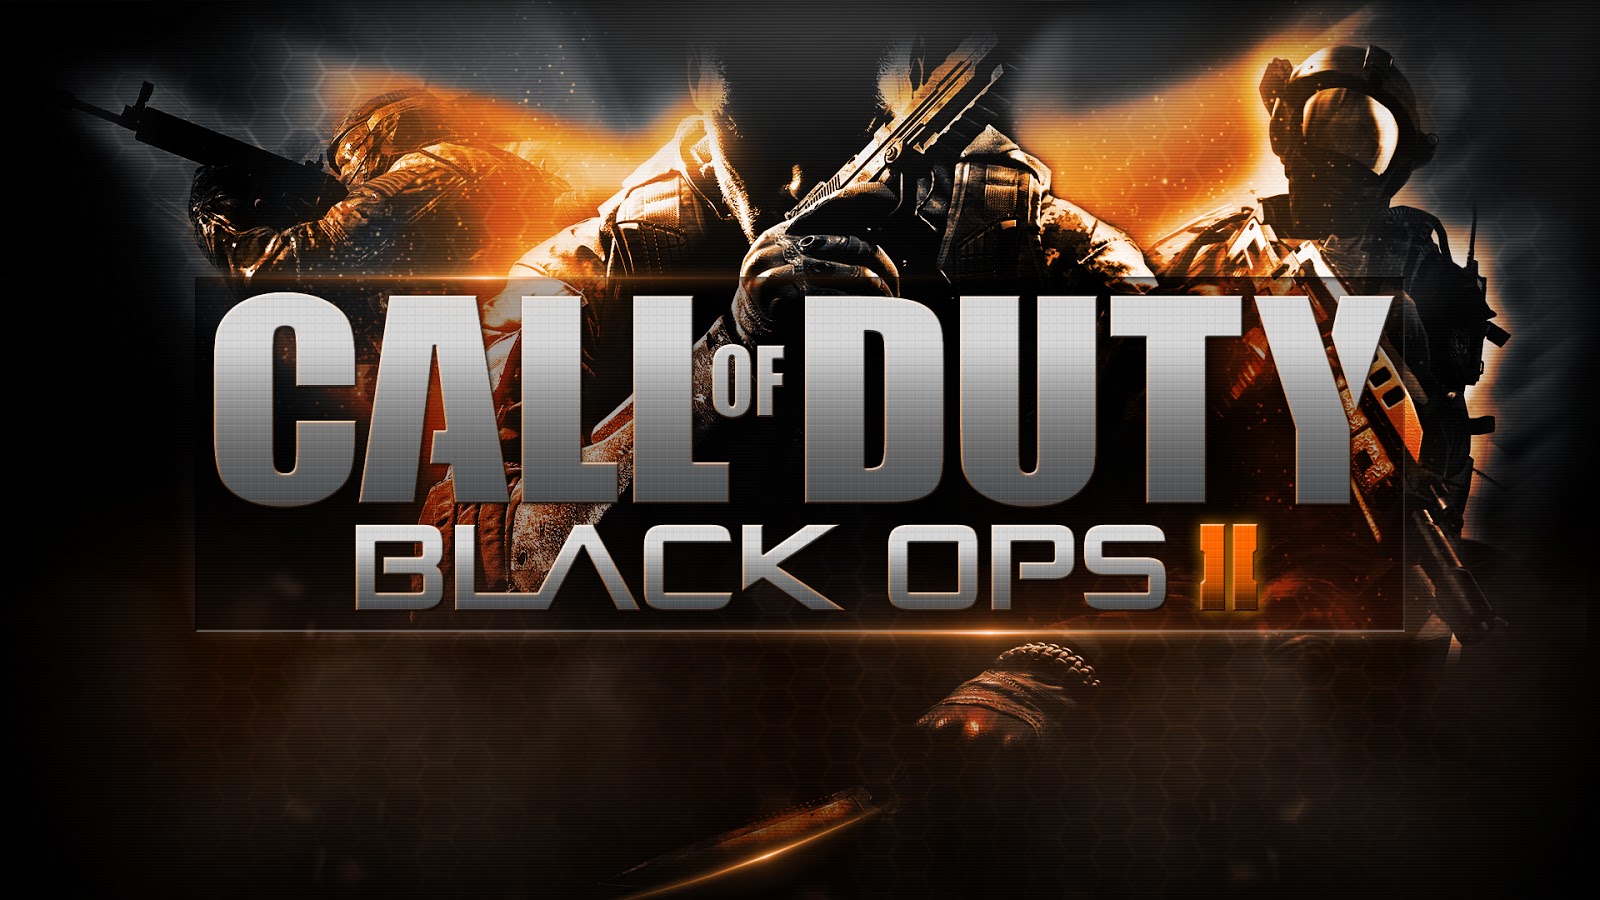 HD WALLPAPERS Call of Duty Black ops 2 HD Wallpapers